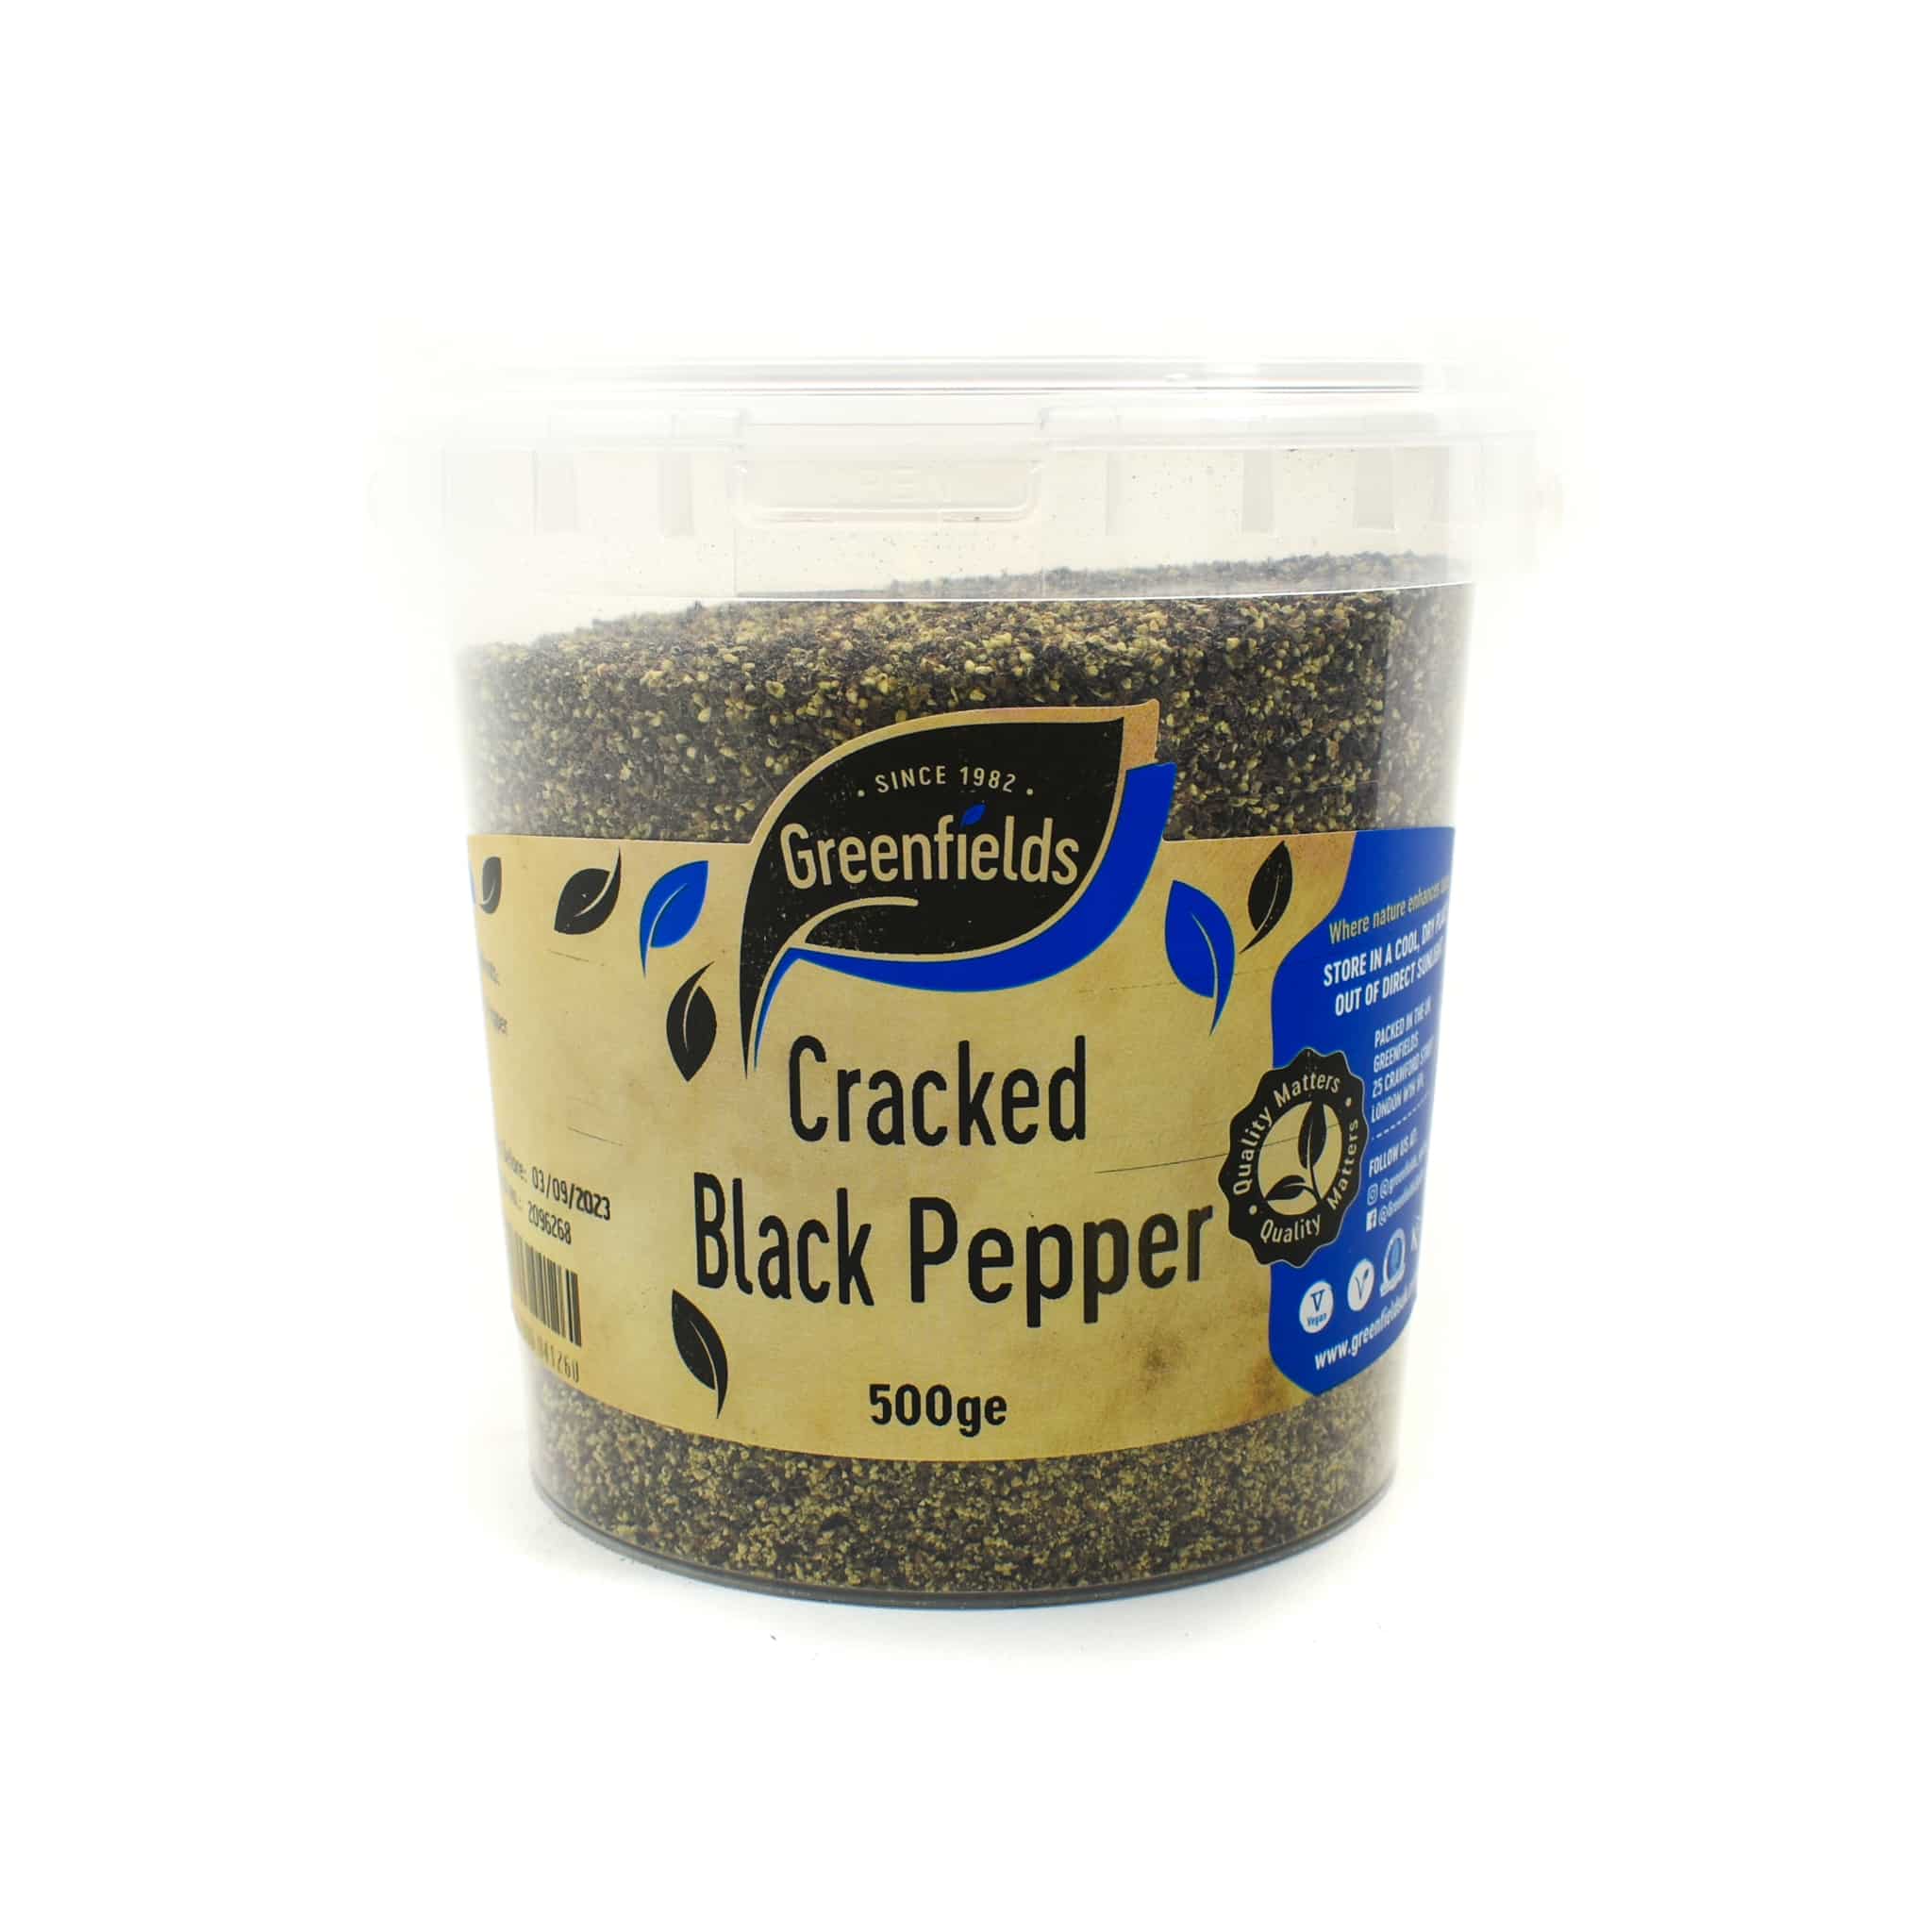 Cracked Black Pepper Catering Size, 500g